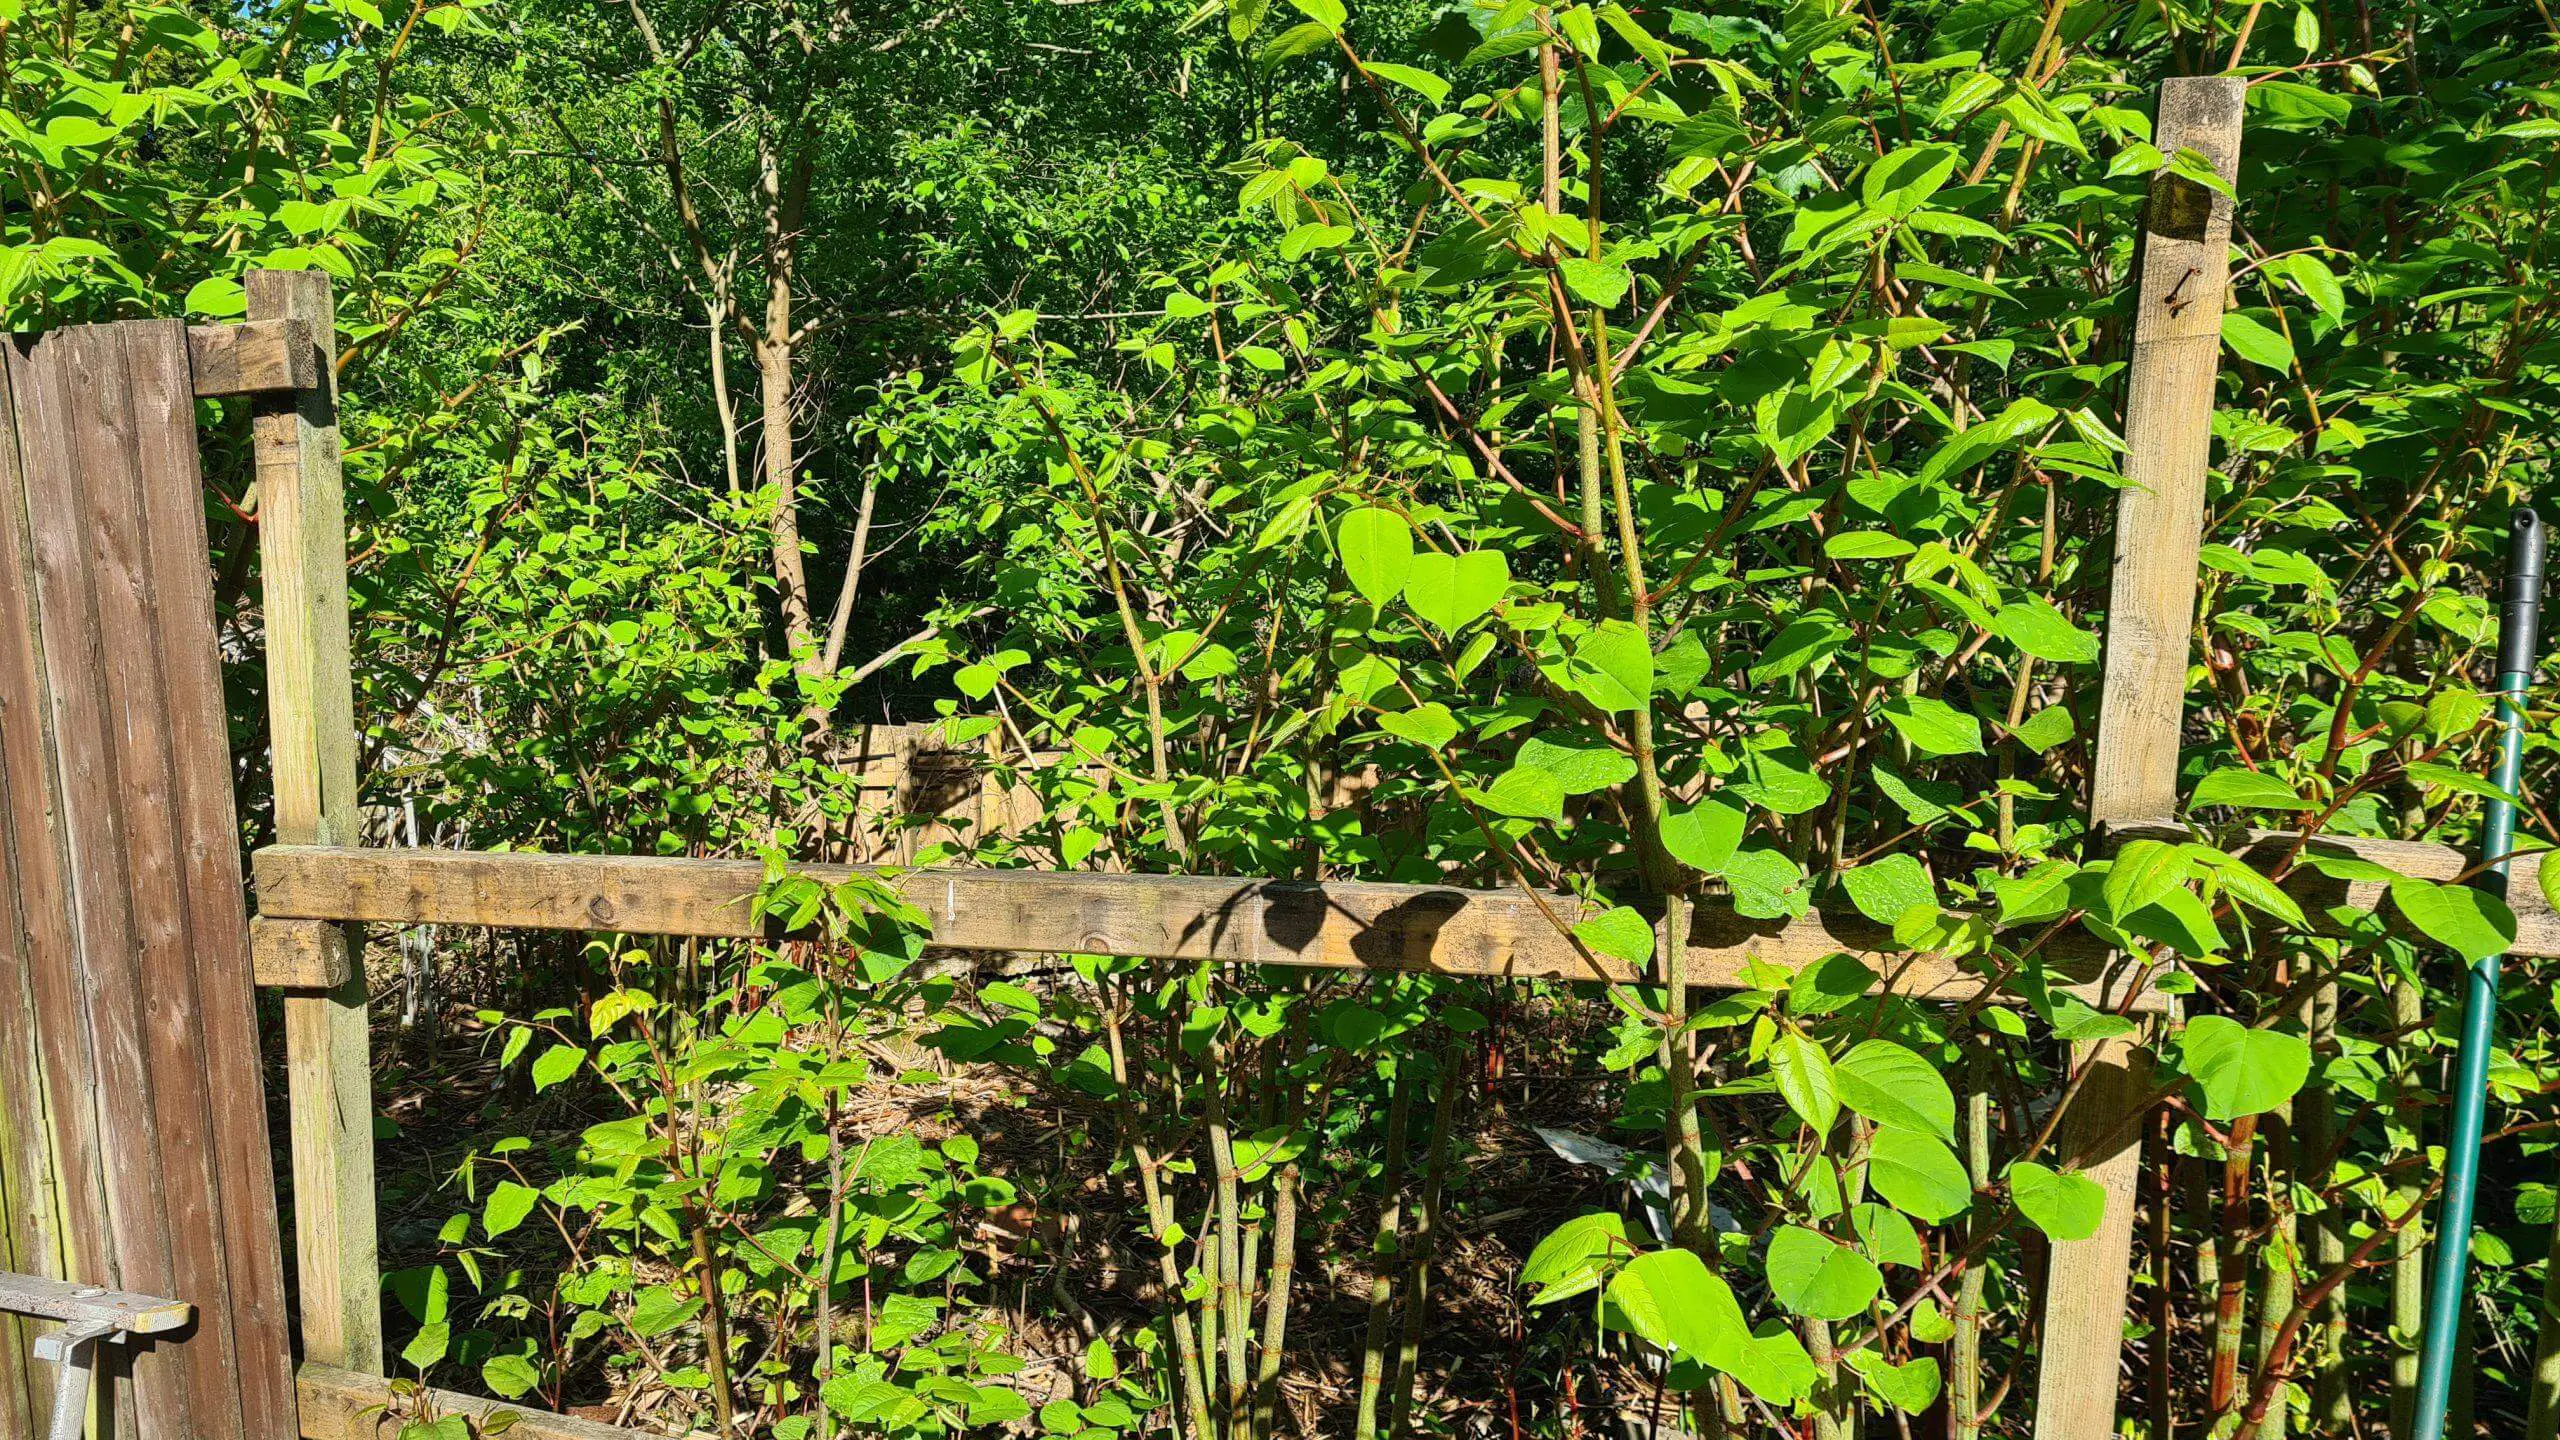 Japanese knotweed broken through a fence onto another property and possible legal action will ensue